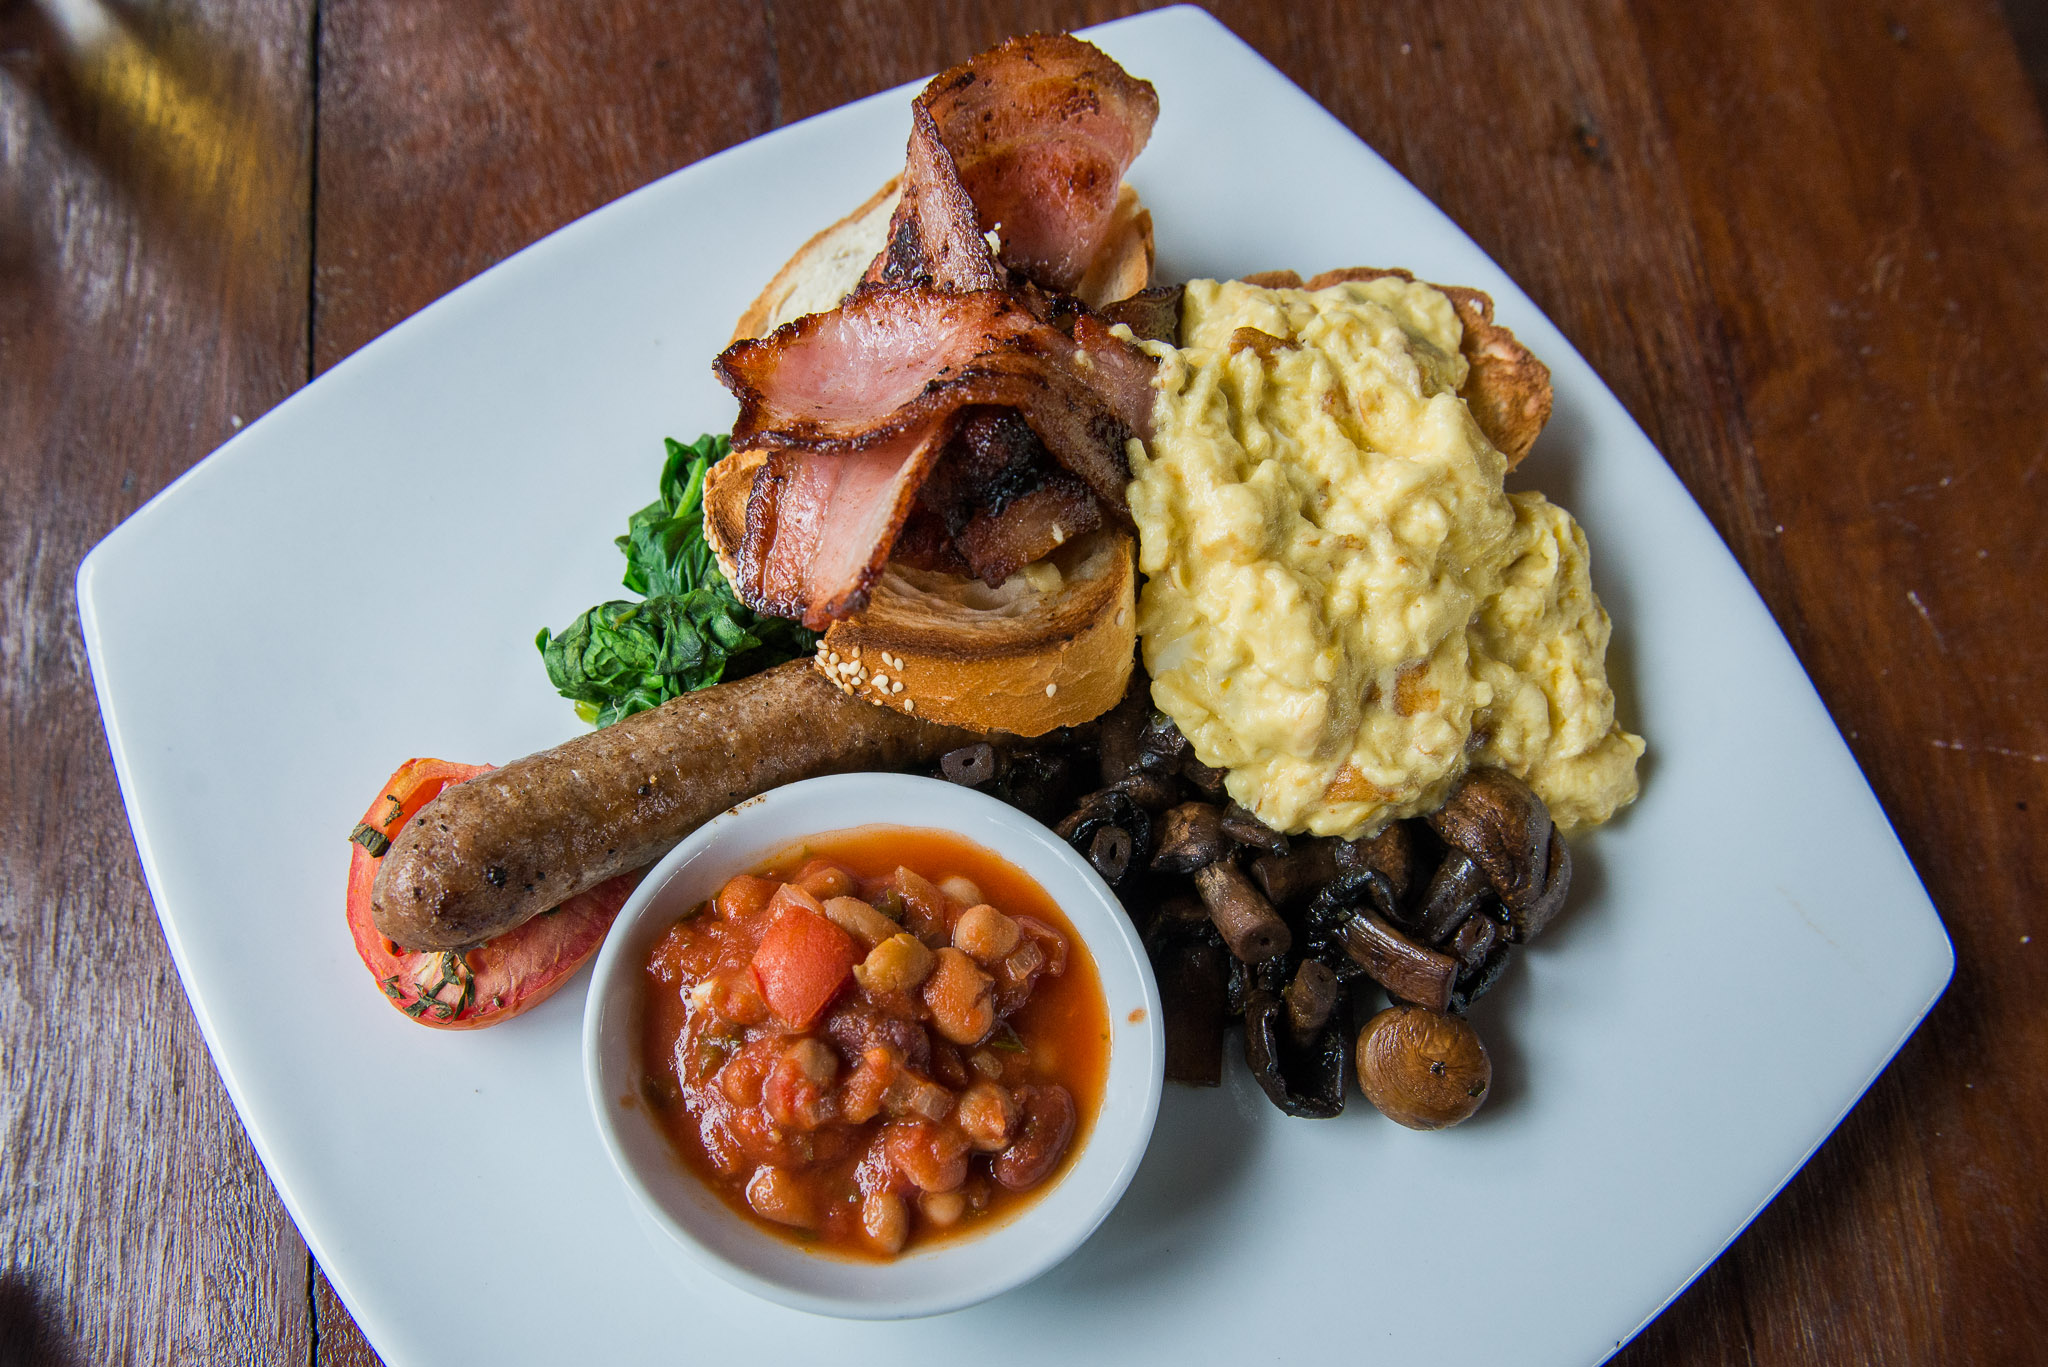 Full breakfast - bacon, sausage, egg, confit tomato, garlic & herb mushroom, wilted spinach, toast, homemade baked beans (AU$22)